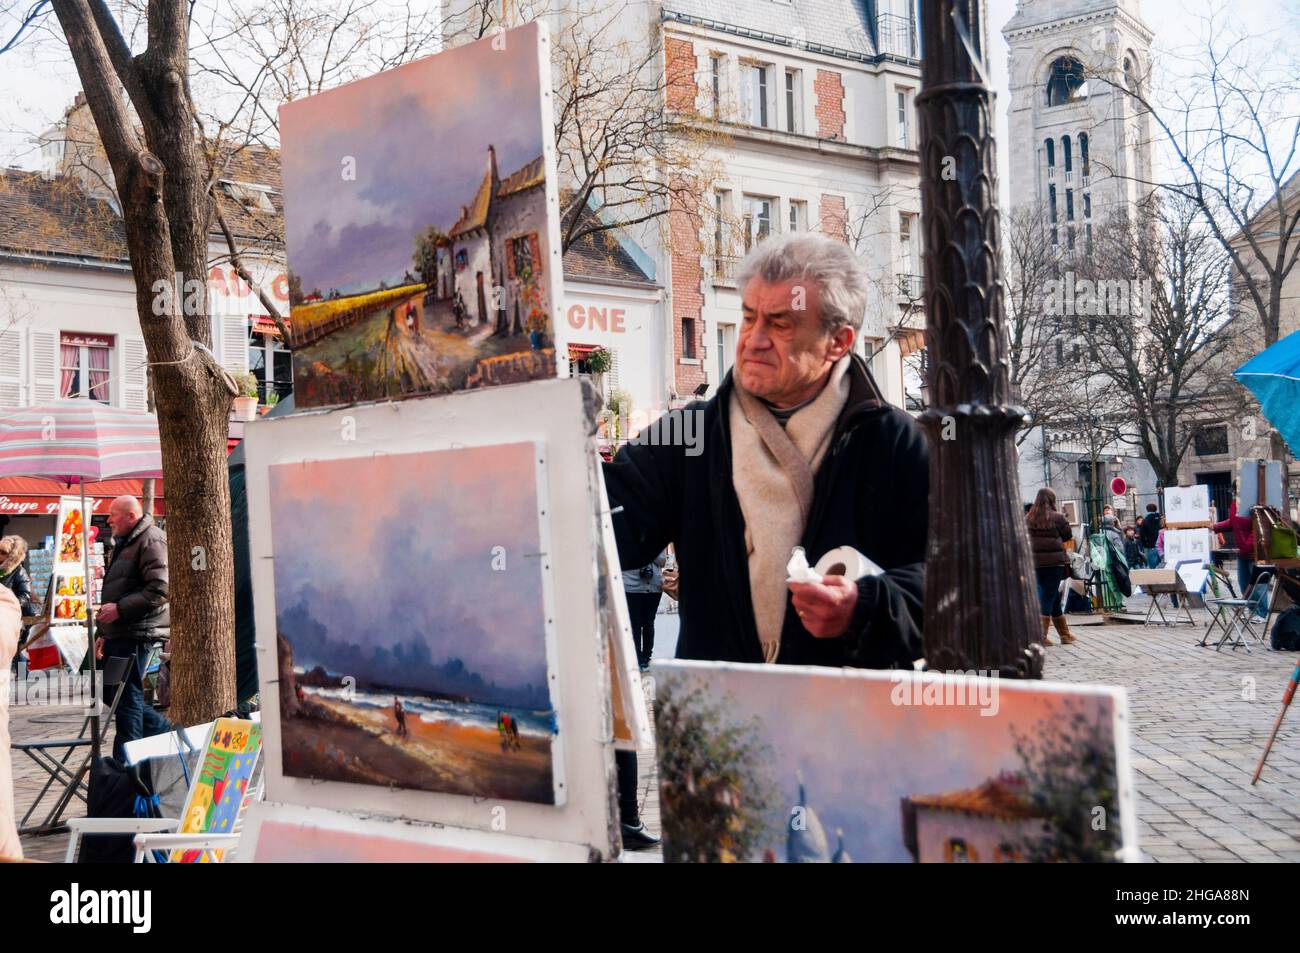 French artist painting on Place du Terre or Artist's Square in the Montmartre, Paris. Stock Photo